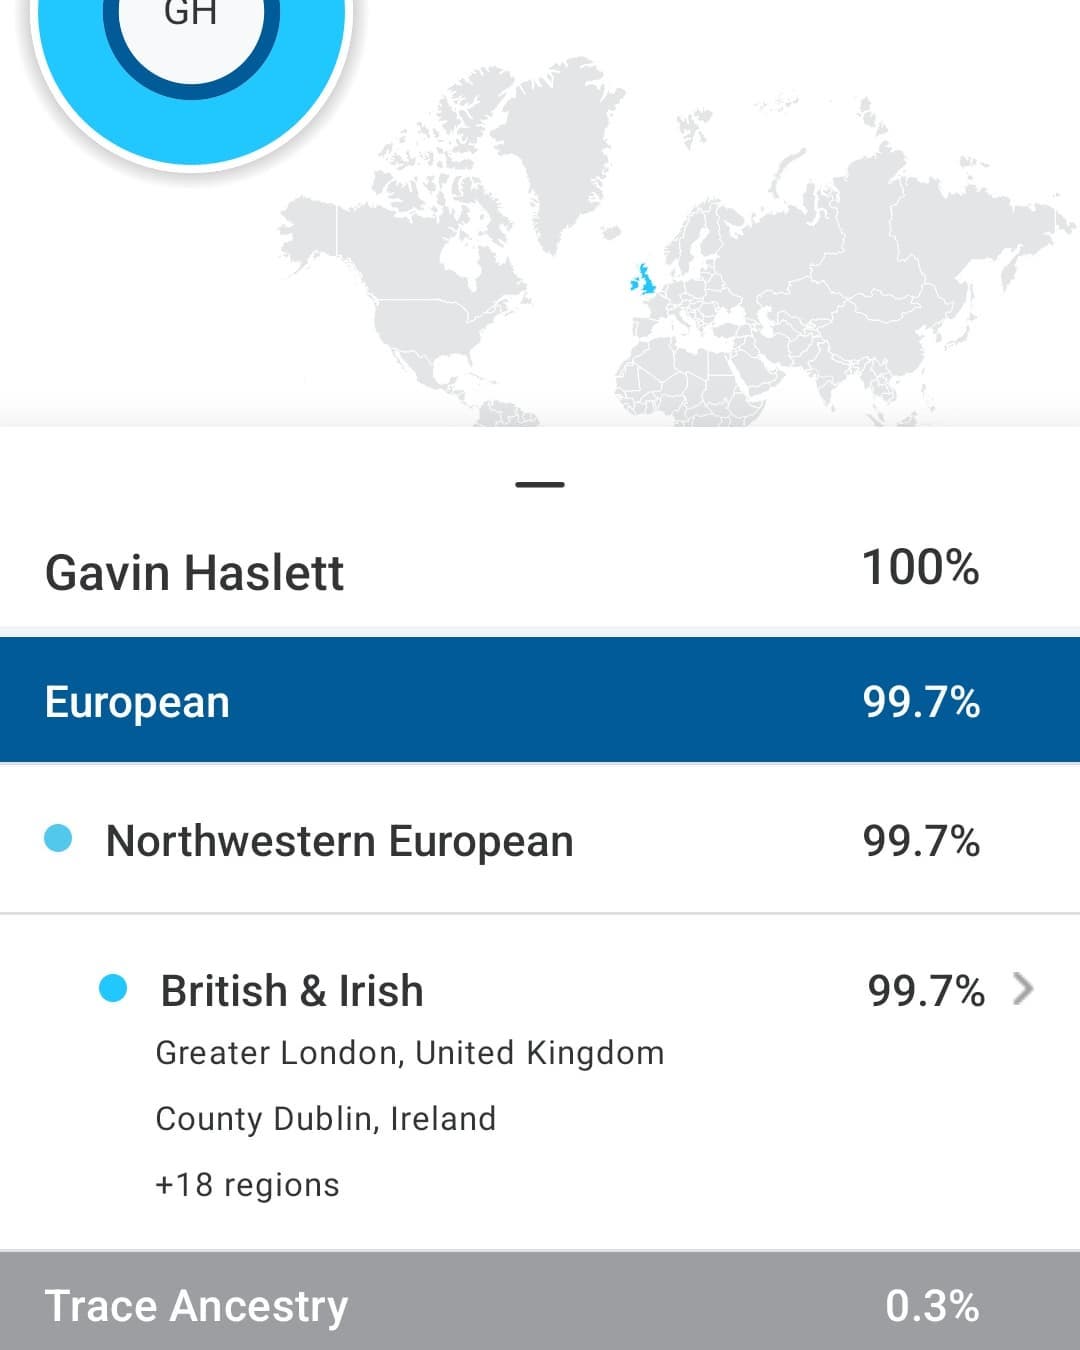 Well I for one find my #23andme results pretty entertaining. Literally no surprise there... Just call me "Control"?